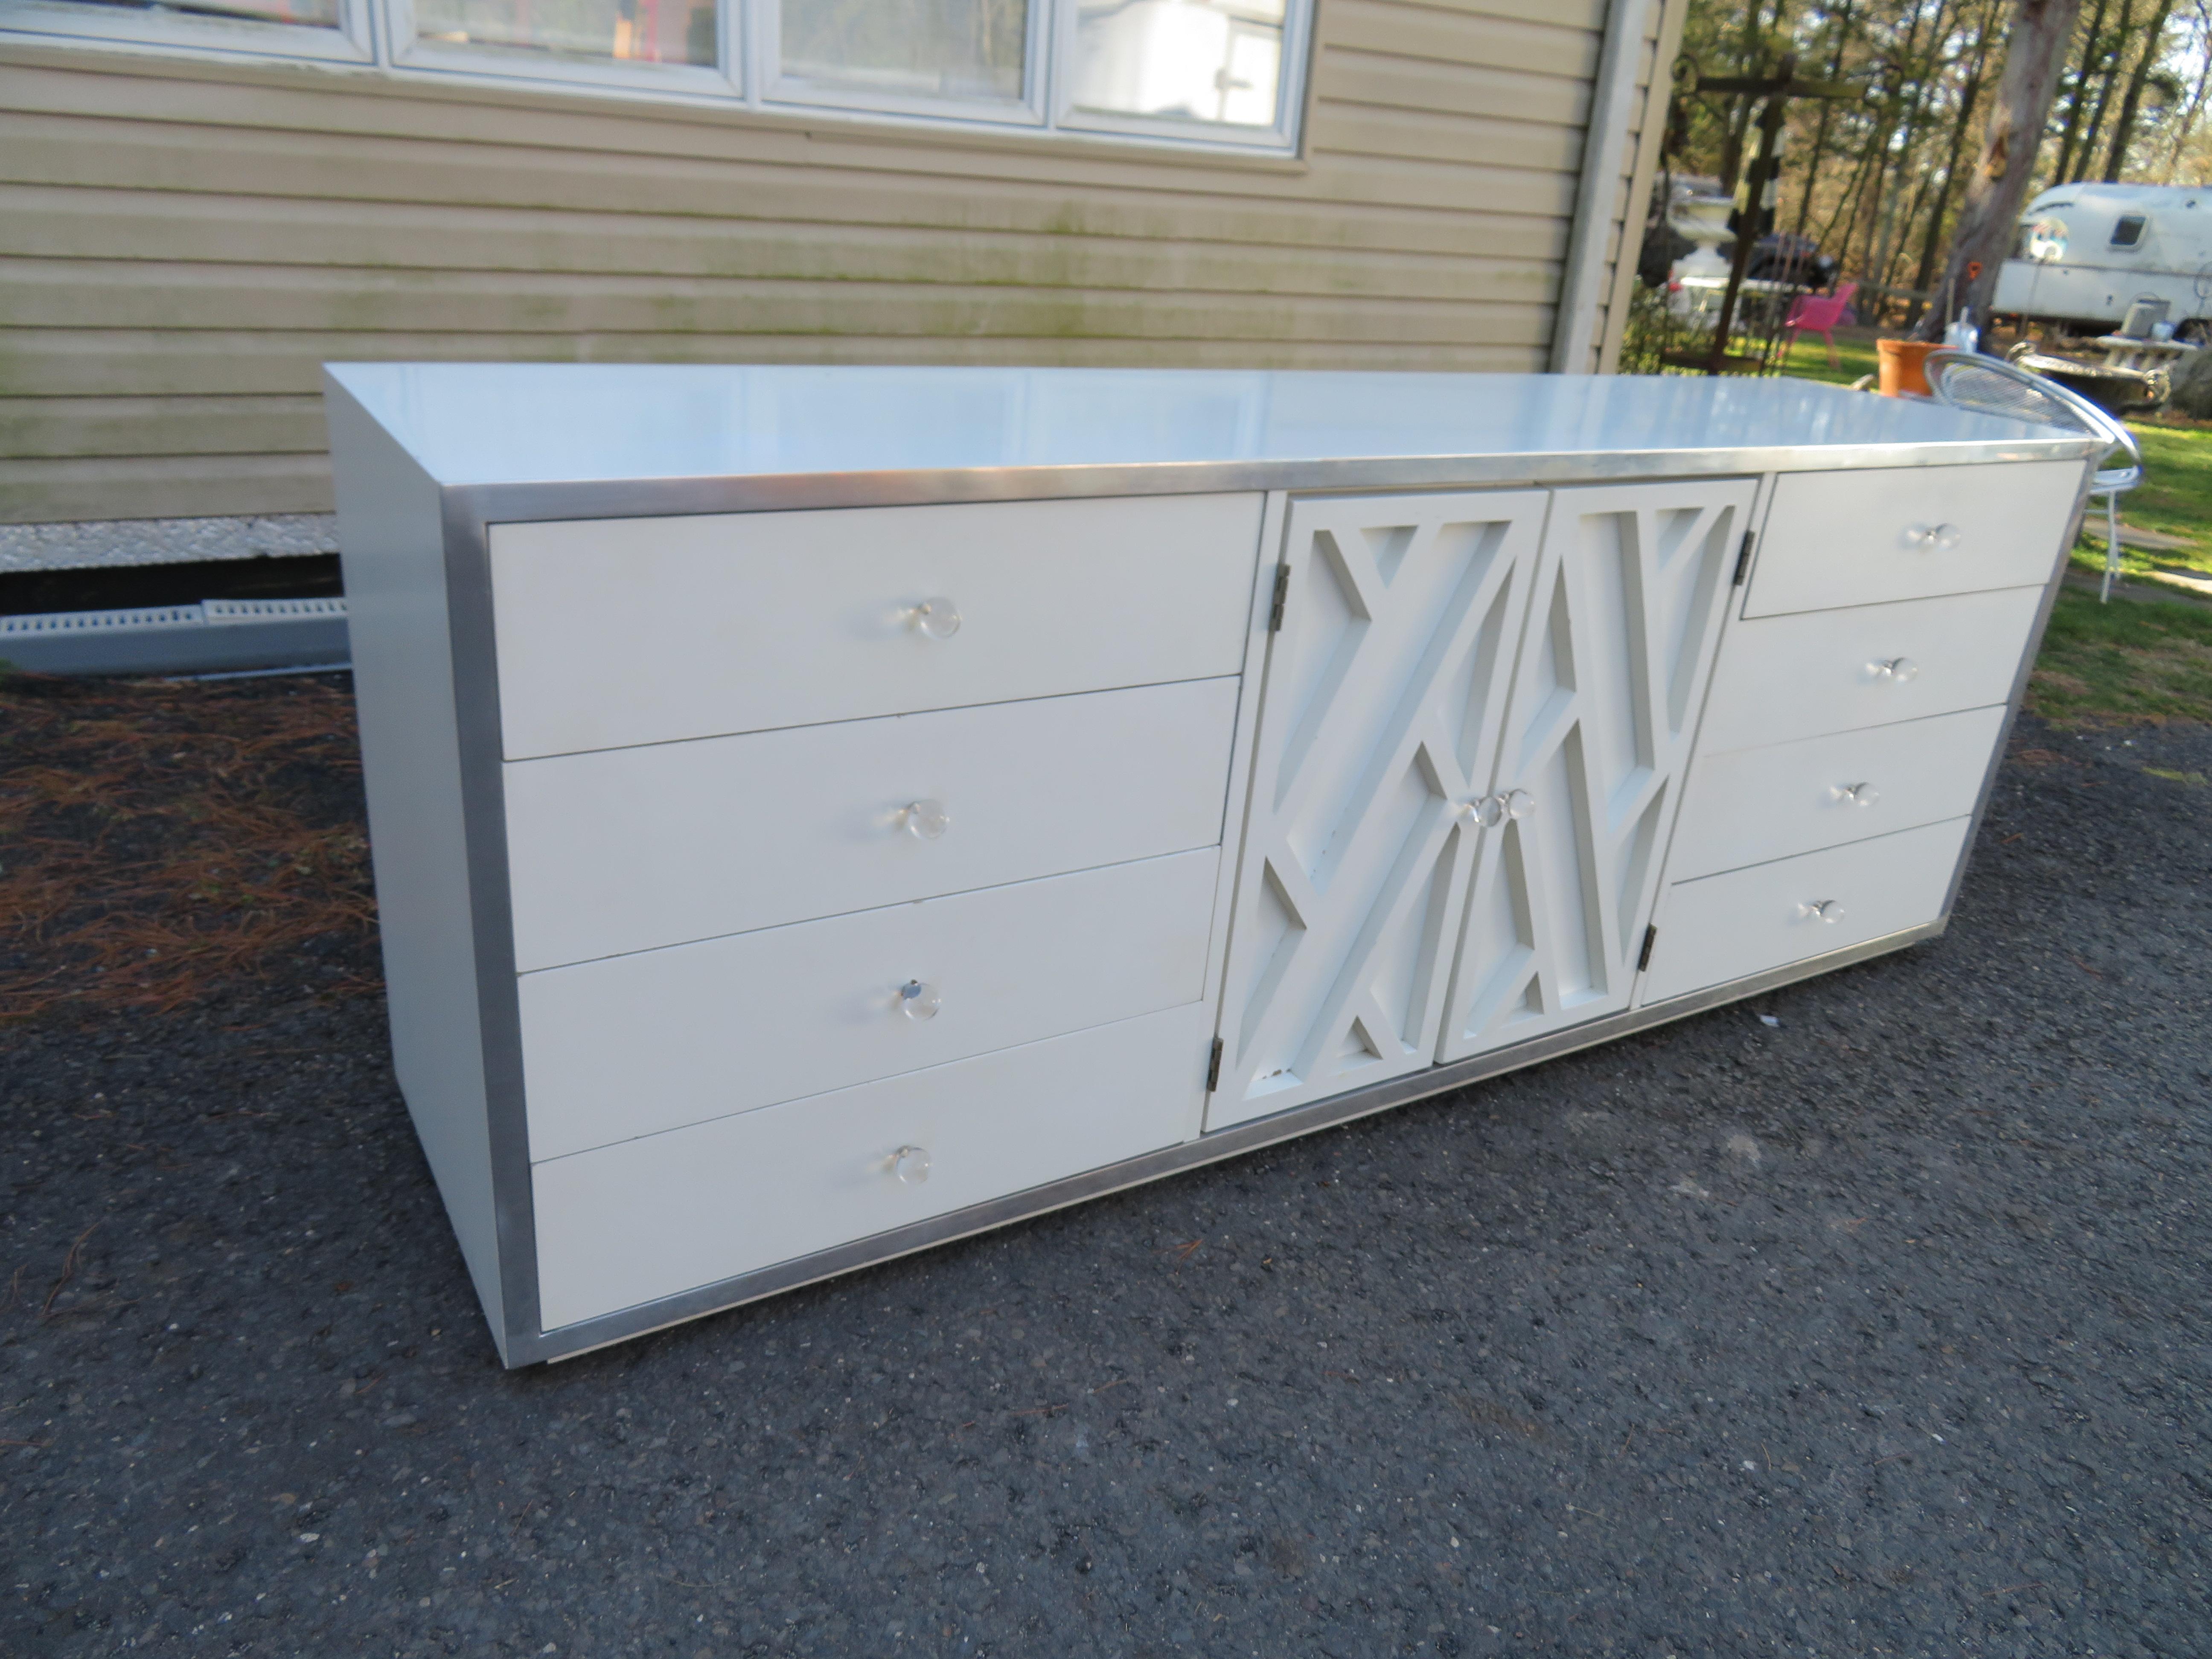 Lovely Milo Baughman-style white lacquered credenza cabinet. Asian-inspired lattice relief detailed doors with lucite pulls open to reveal two deep drawers. A bank of 4 drawers each on either side is all surrounded by a shiny aluminium frame. This